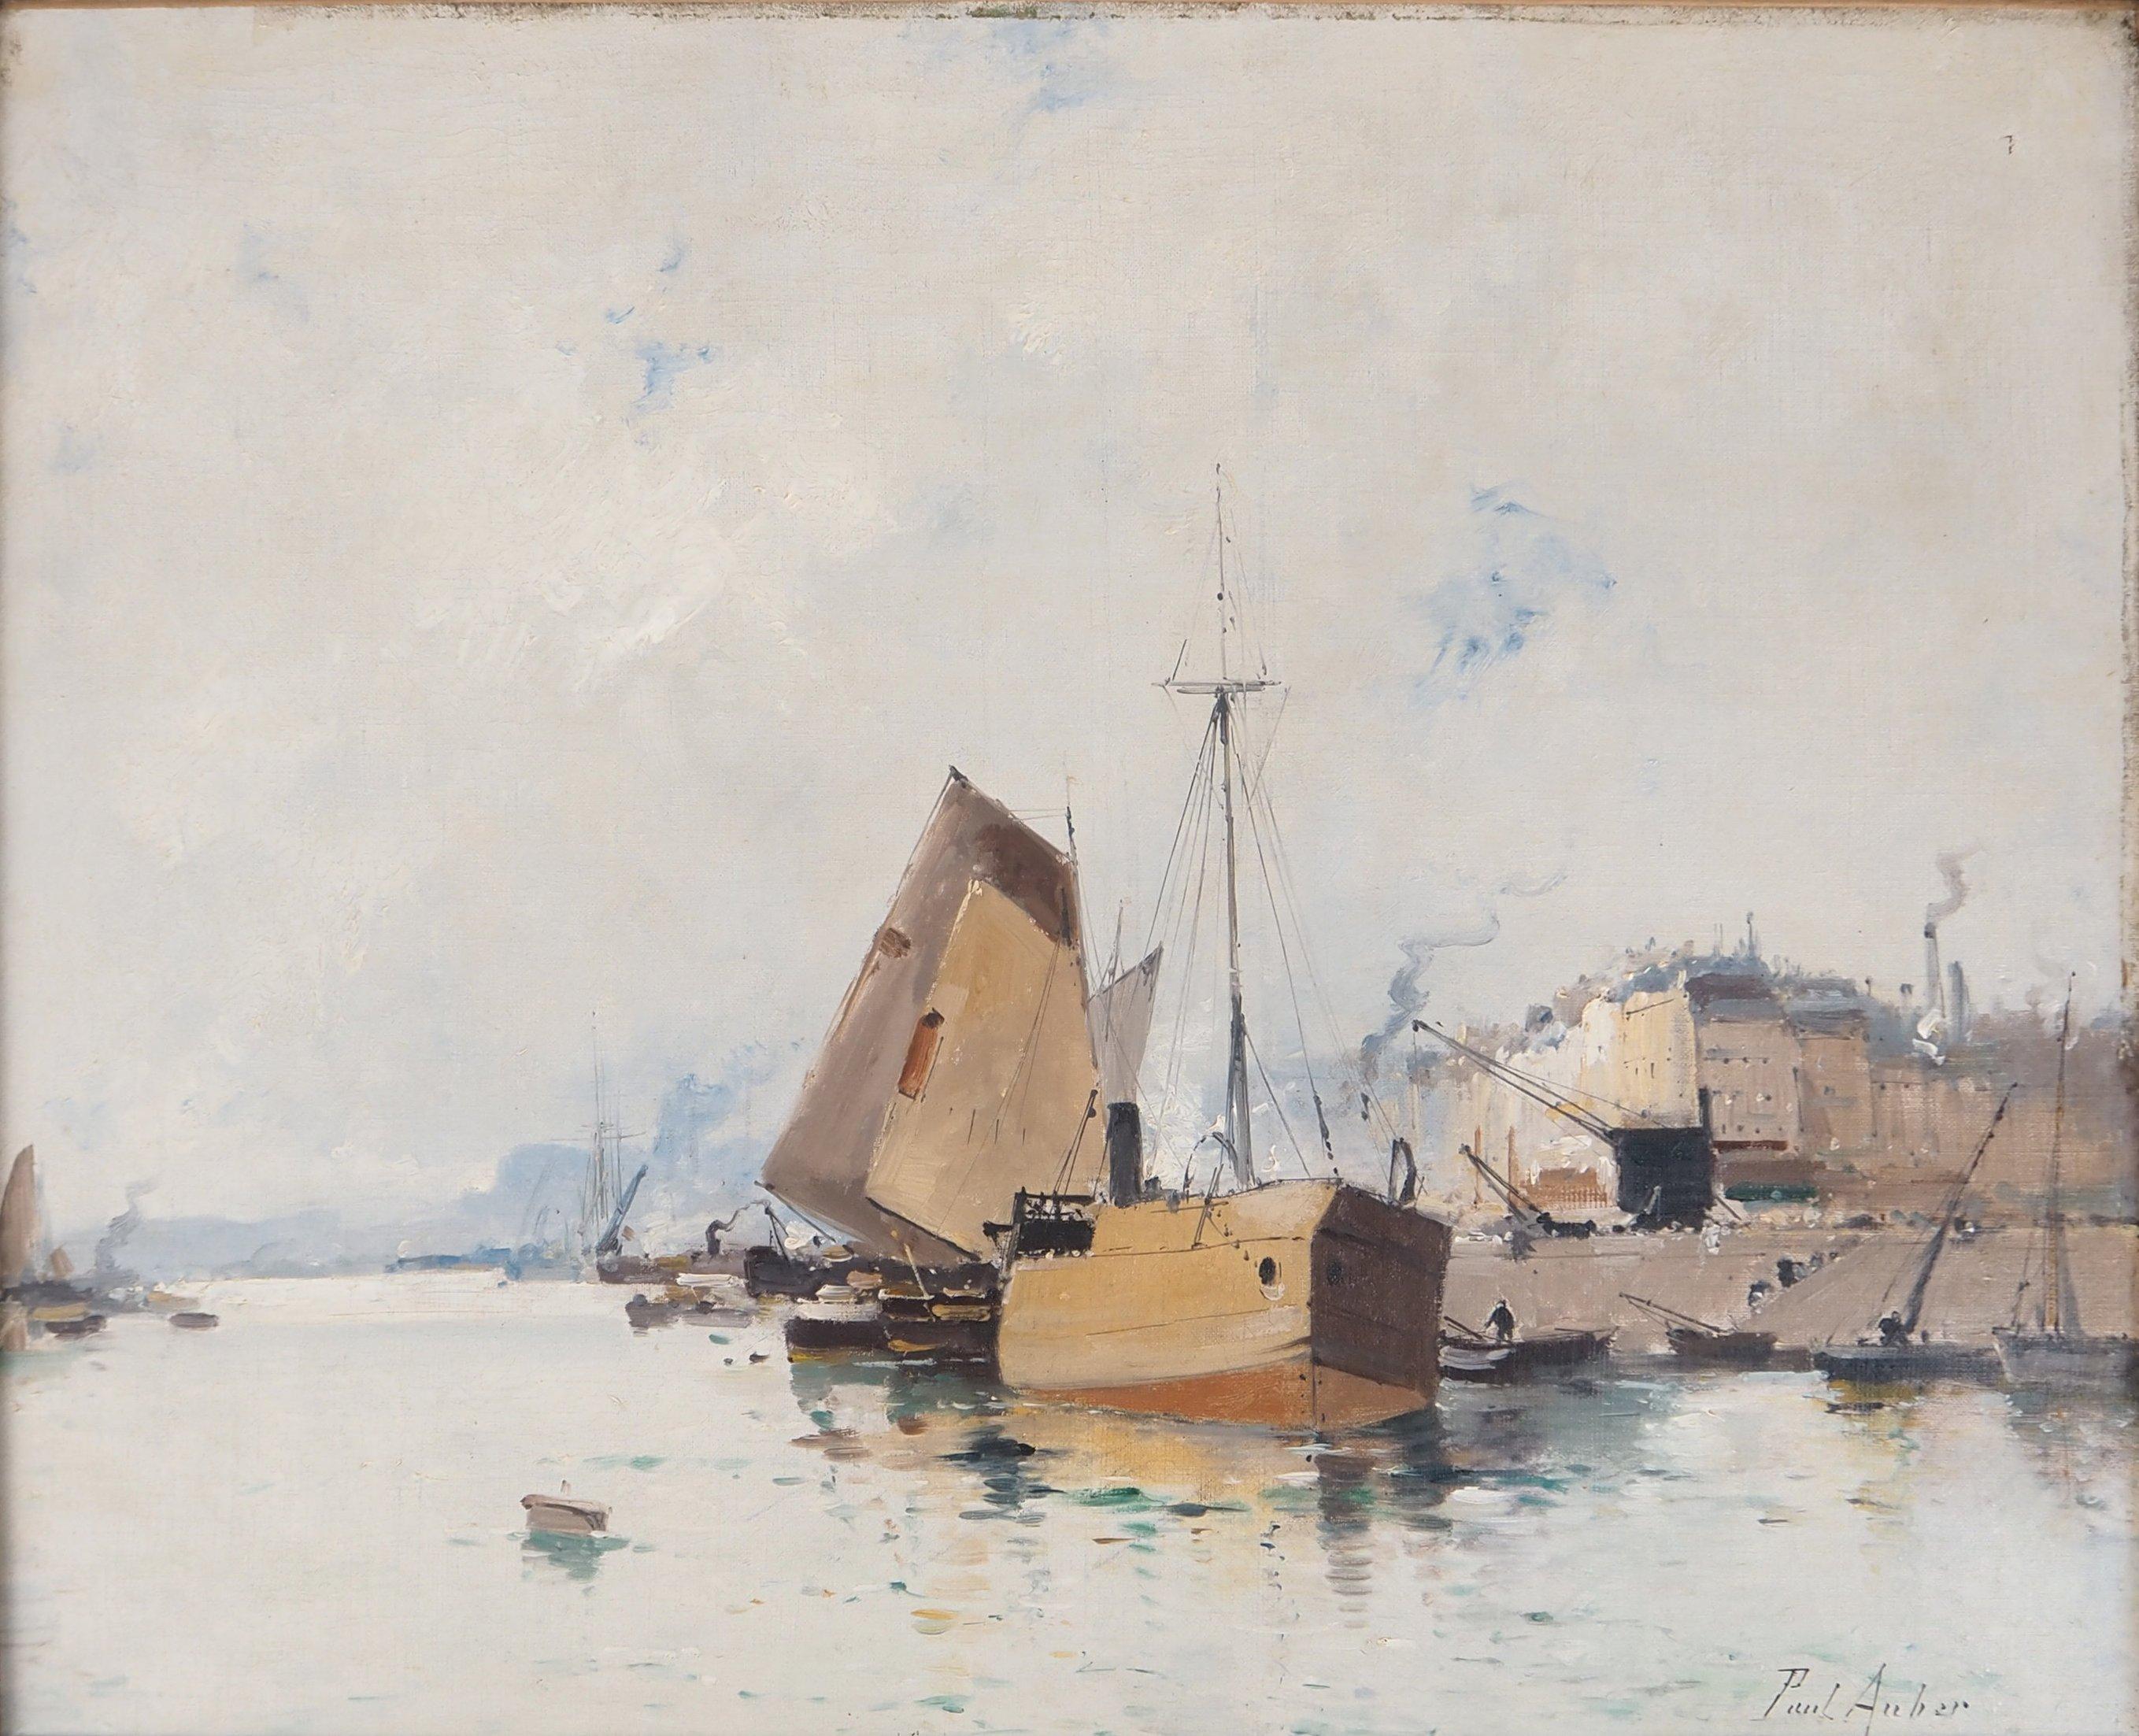 Boats Leaving the Harbor - Original painting on canvas - Signed - Painting by Eugene Galien-Laloue